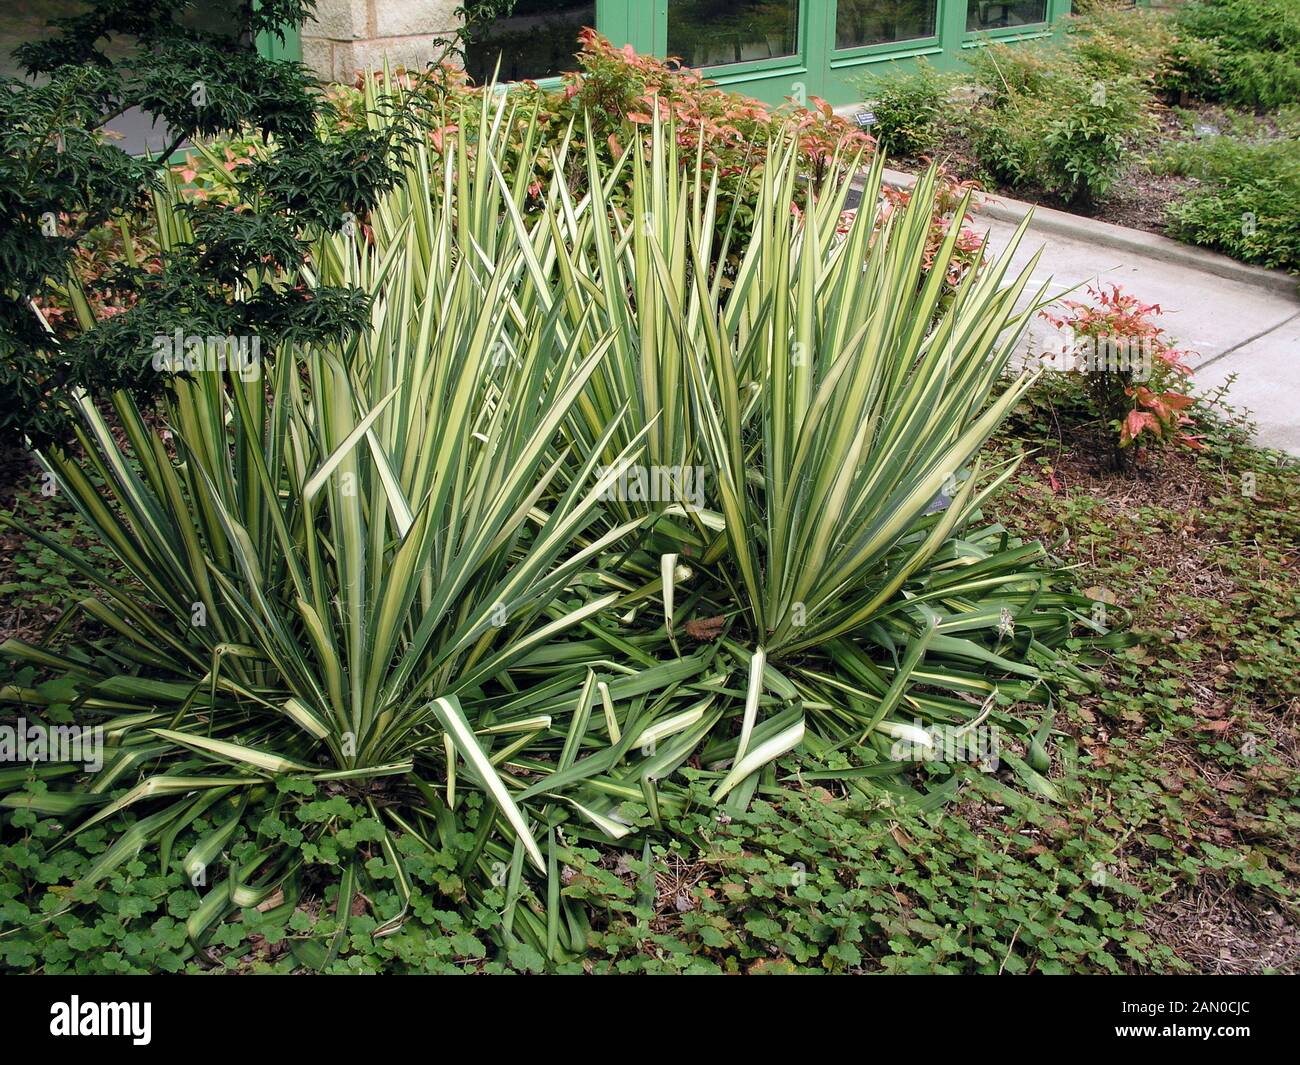 YUCCA 'GARLAND GOLD'  IN BORDER WITH SHRUBS Stock Photo